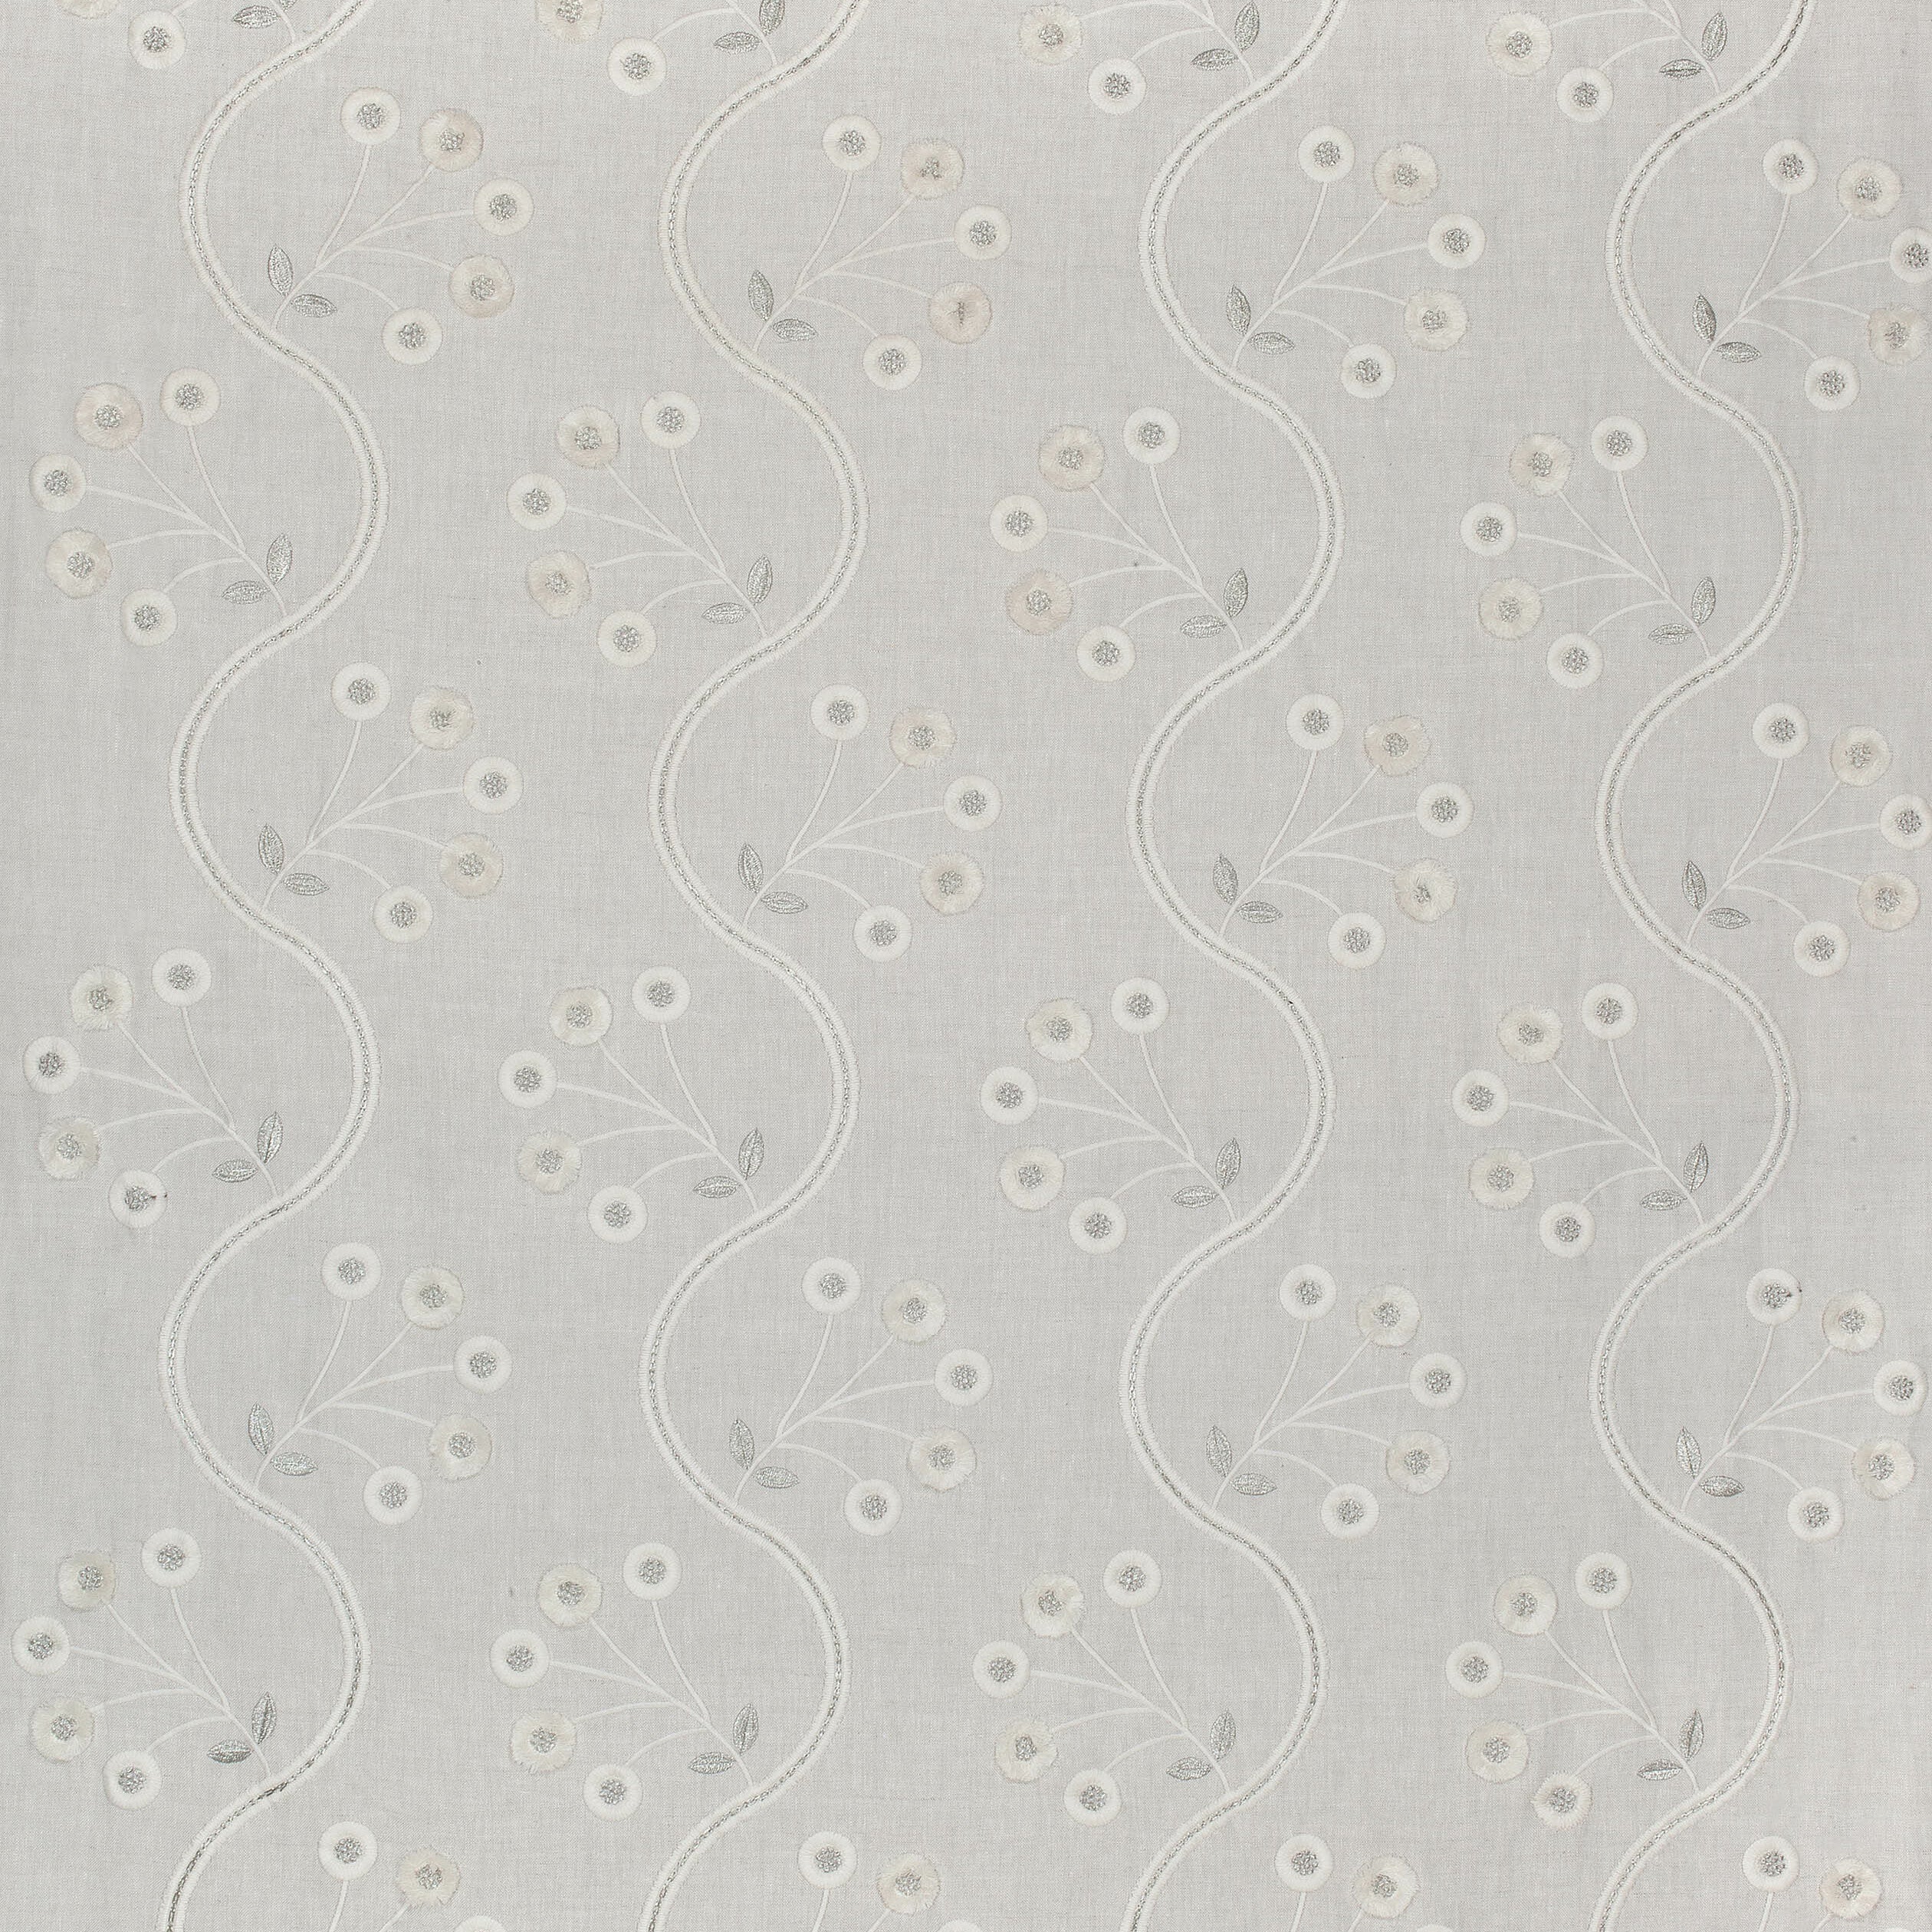 Olympus Embroidery fabric in natural color - pattern number AW9100 - by Anna French in the Natural Glimmer collection